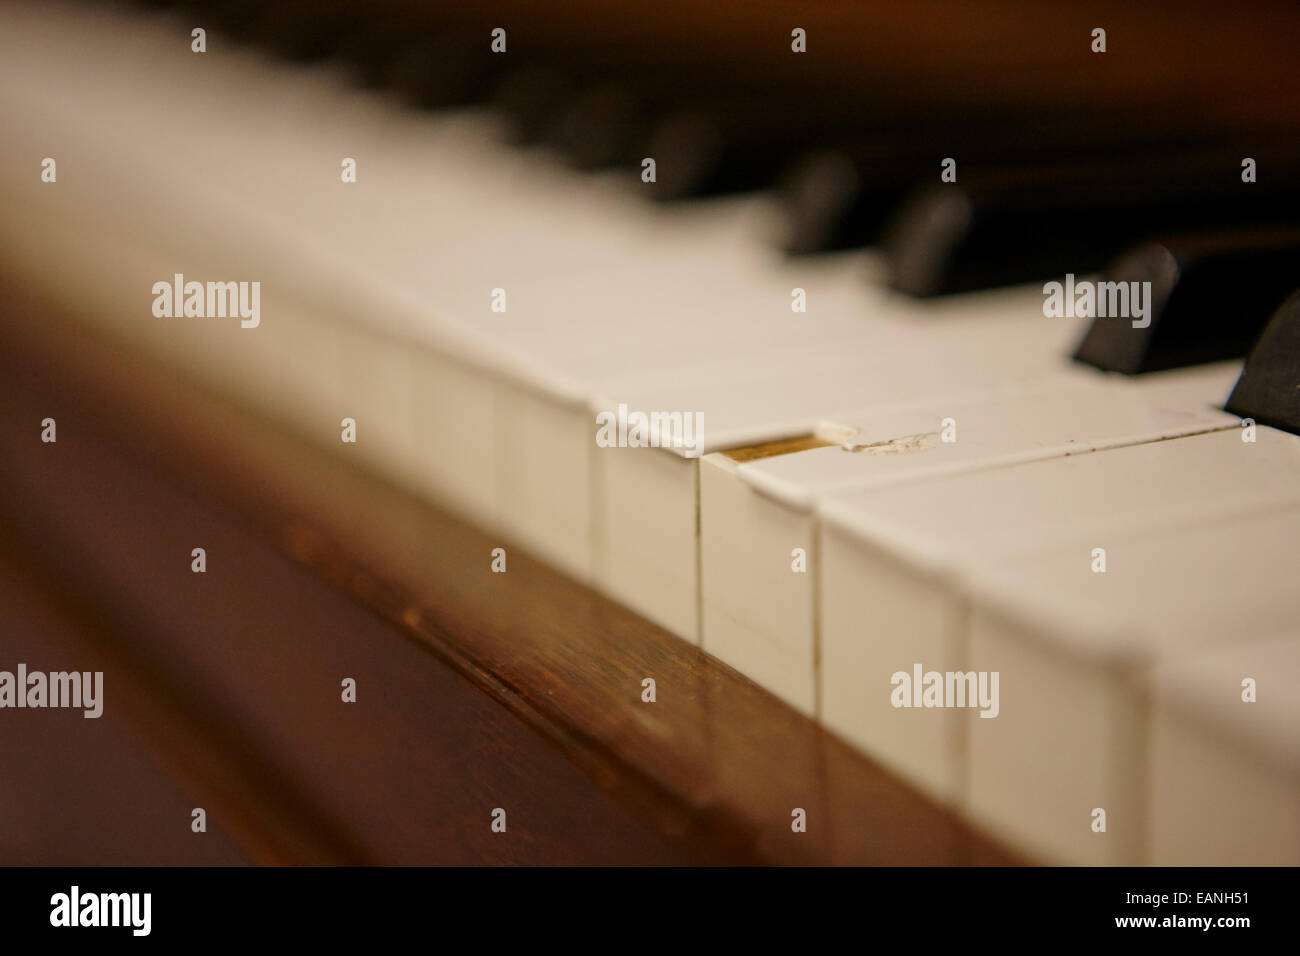 chipped key on a baby grand piano in a music training room Stock Photo